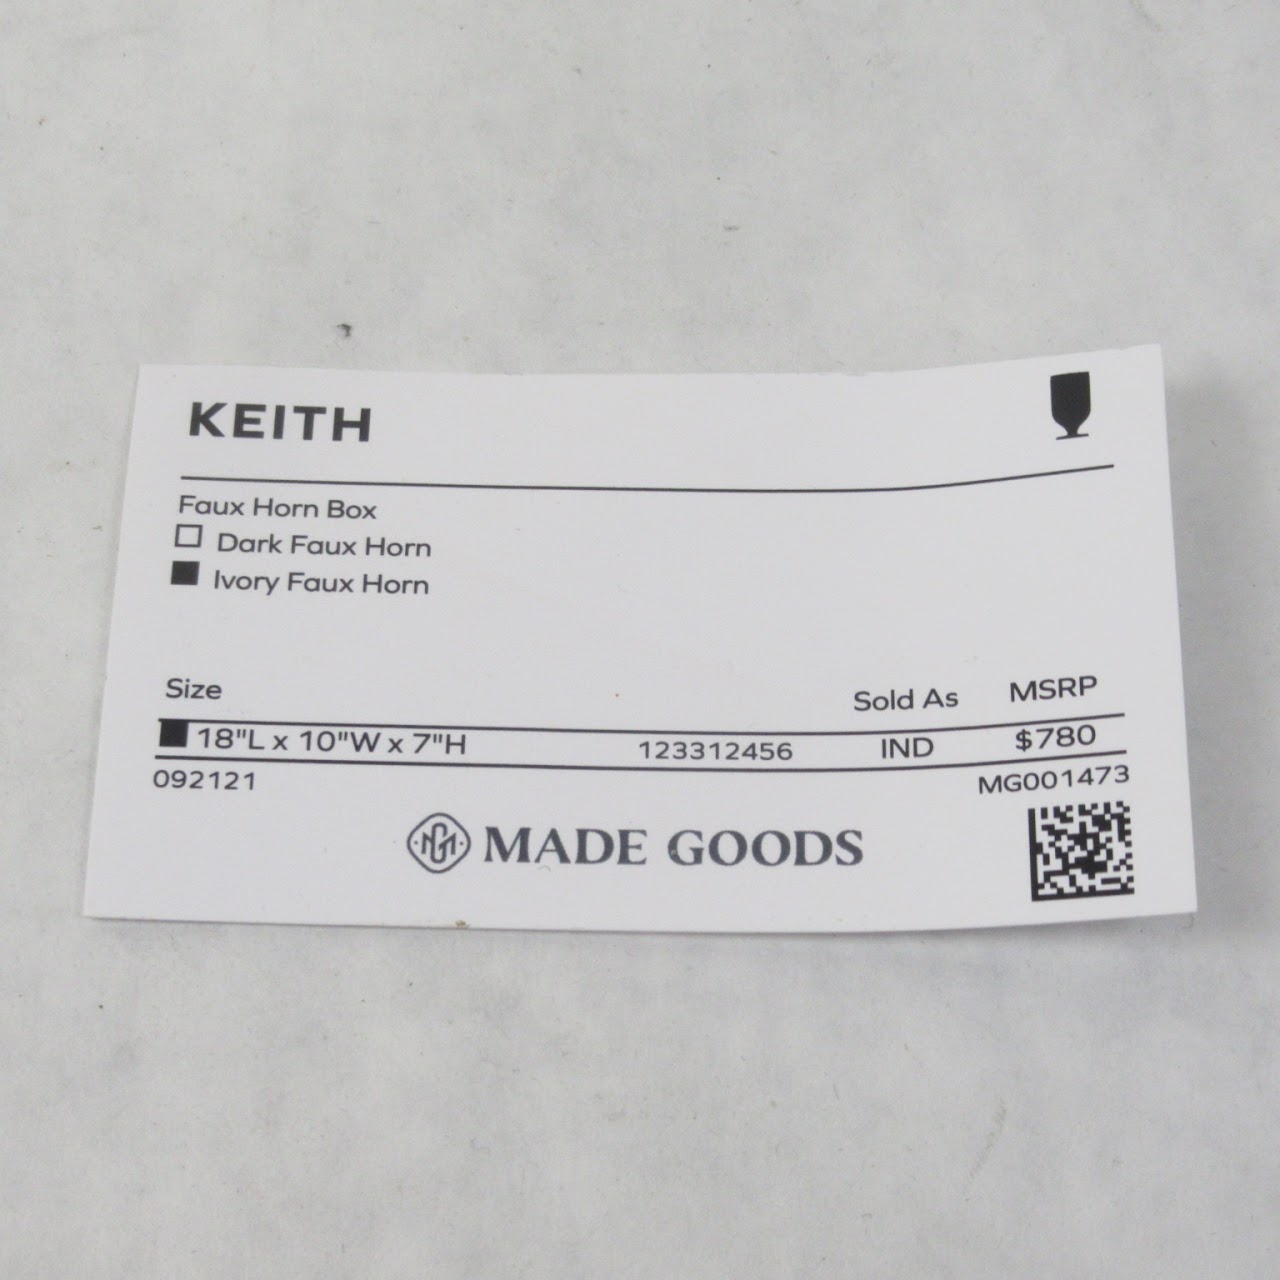 Made Goods Keith Faux Light Horn Box